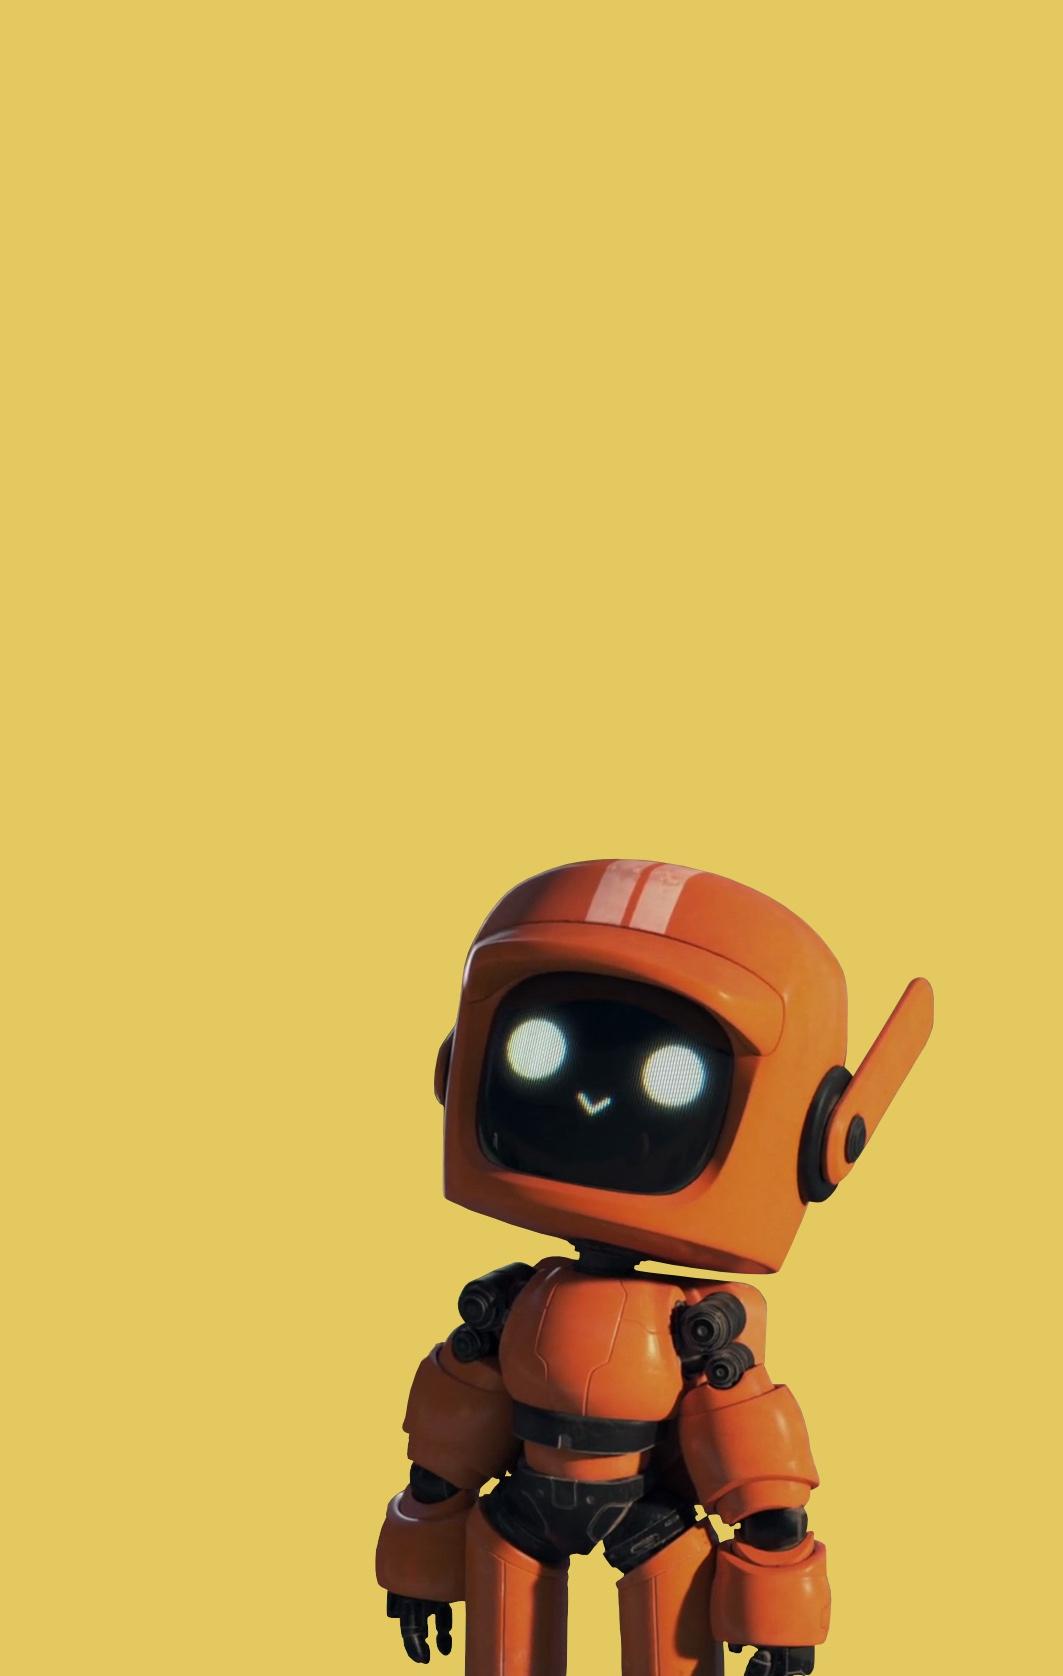 Love Death  Robots on X Vol 3 wallpapers for desktop and mobile Our  gift to you  httpstcoCxA5hSq4UW httpstcokbesmkWyOf  X